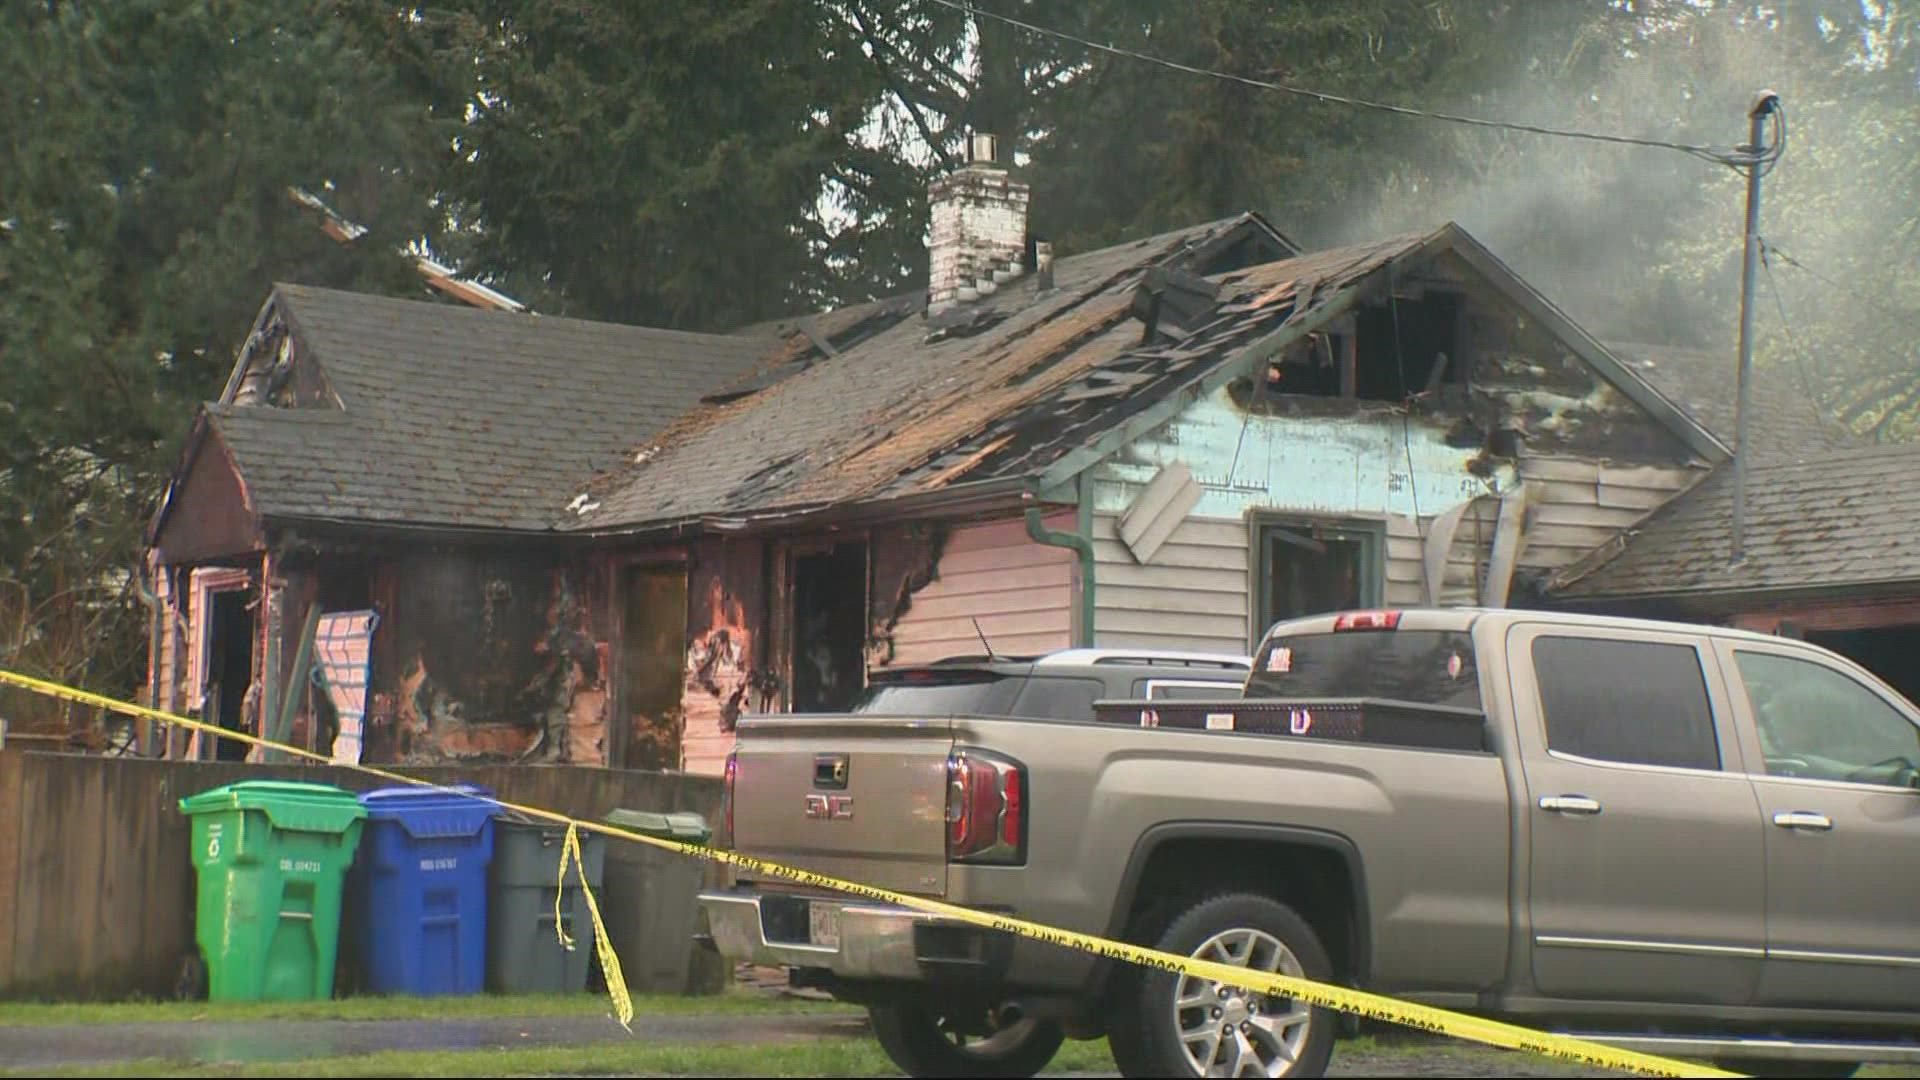 The fire started around 4 a.m. in the Cully neighborhood on Northeast 57th Avenue.